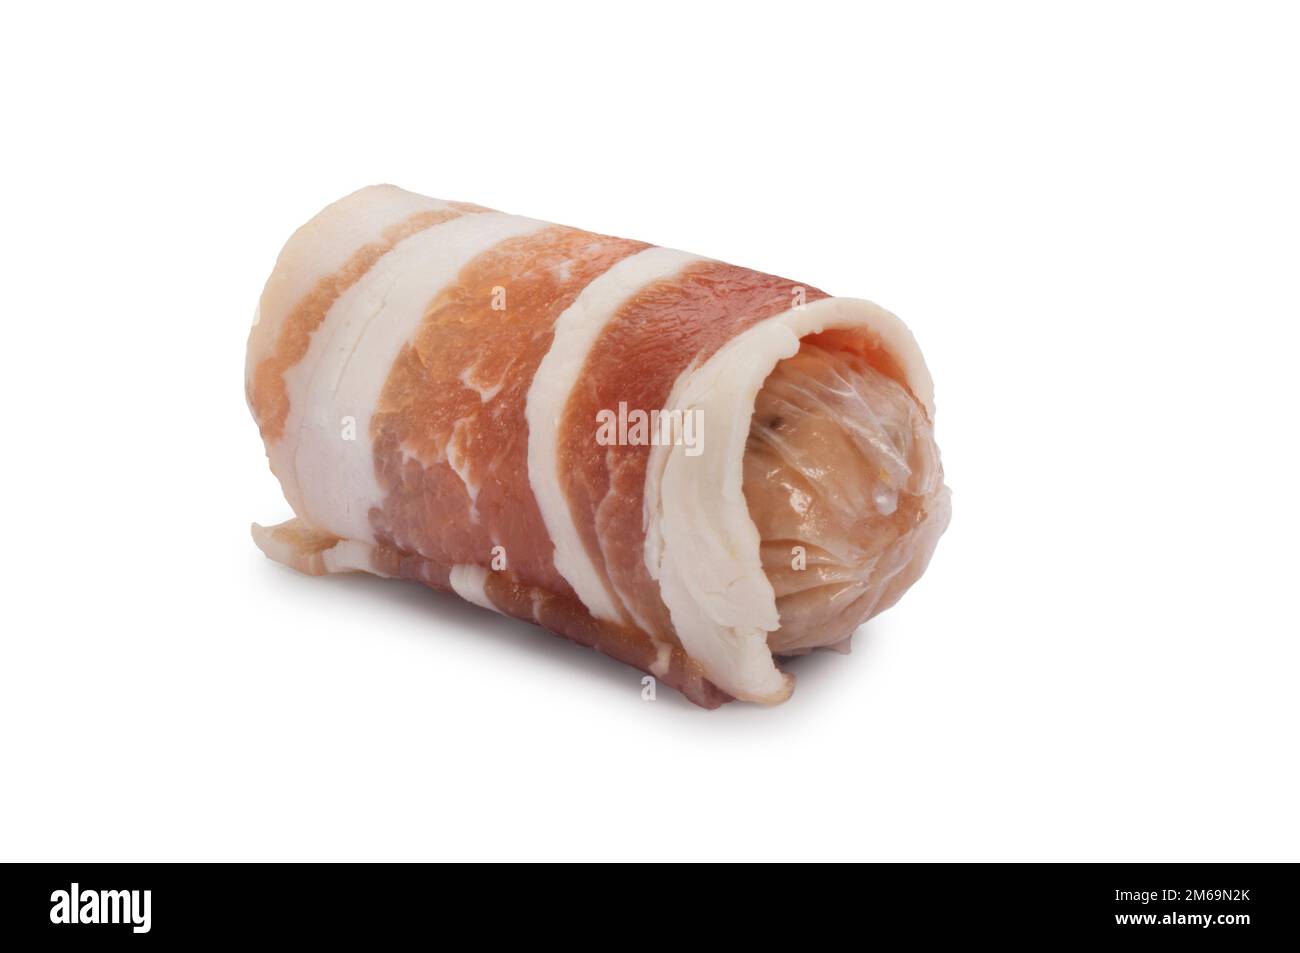 Studio shot of traditional pigs in blankets cut out against a white background - John Gollop Stock Photo